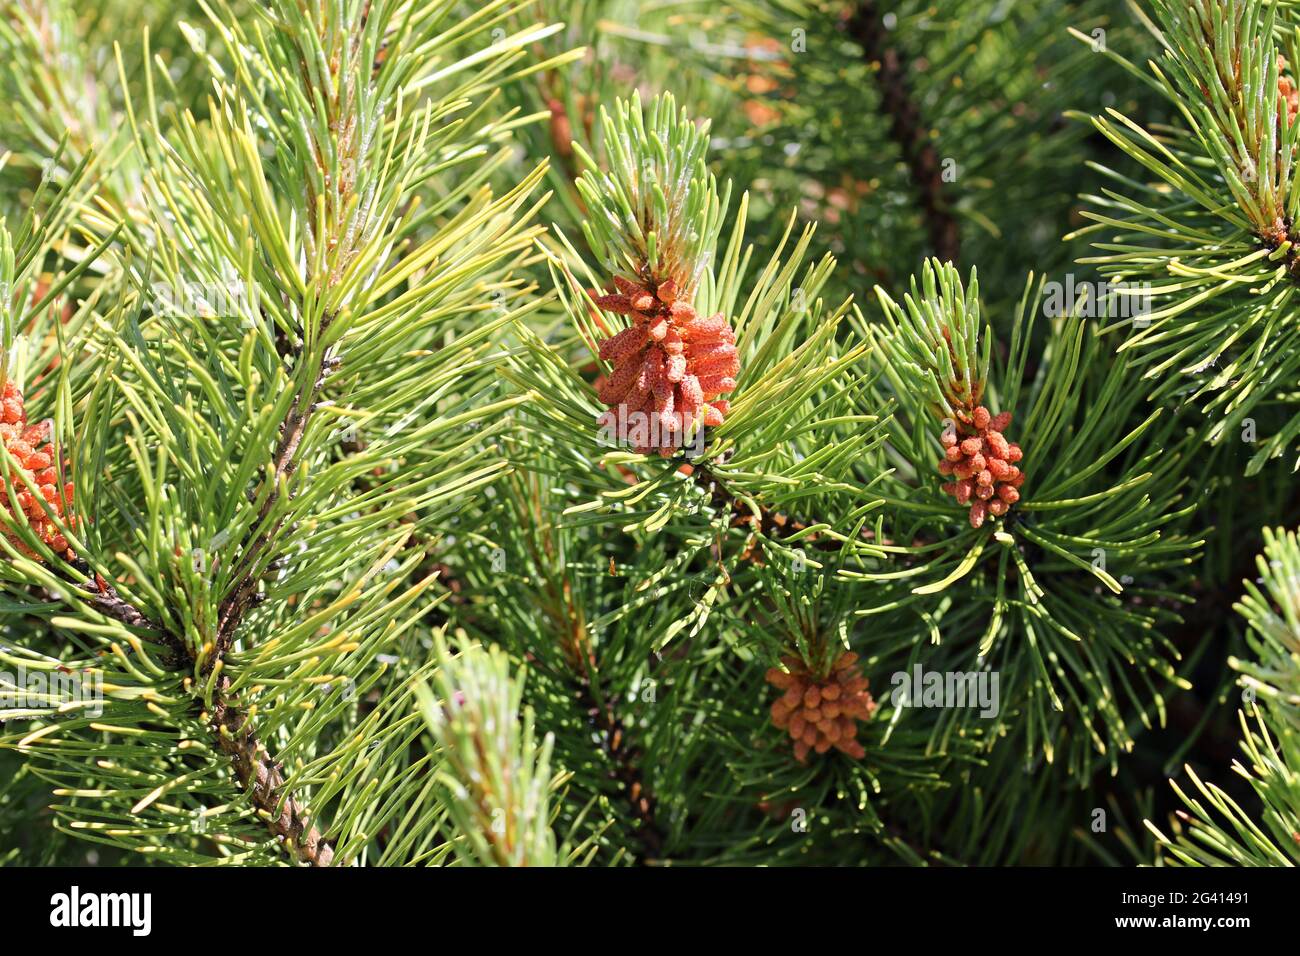 Dwarf mountain pine, Pinus mugo, variety Carstens Wintergold with male pollen producing strobili and new shoots in spring with a background of blurred Stock Photo